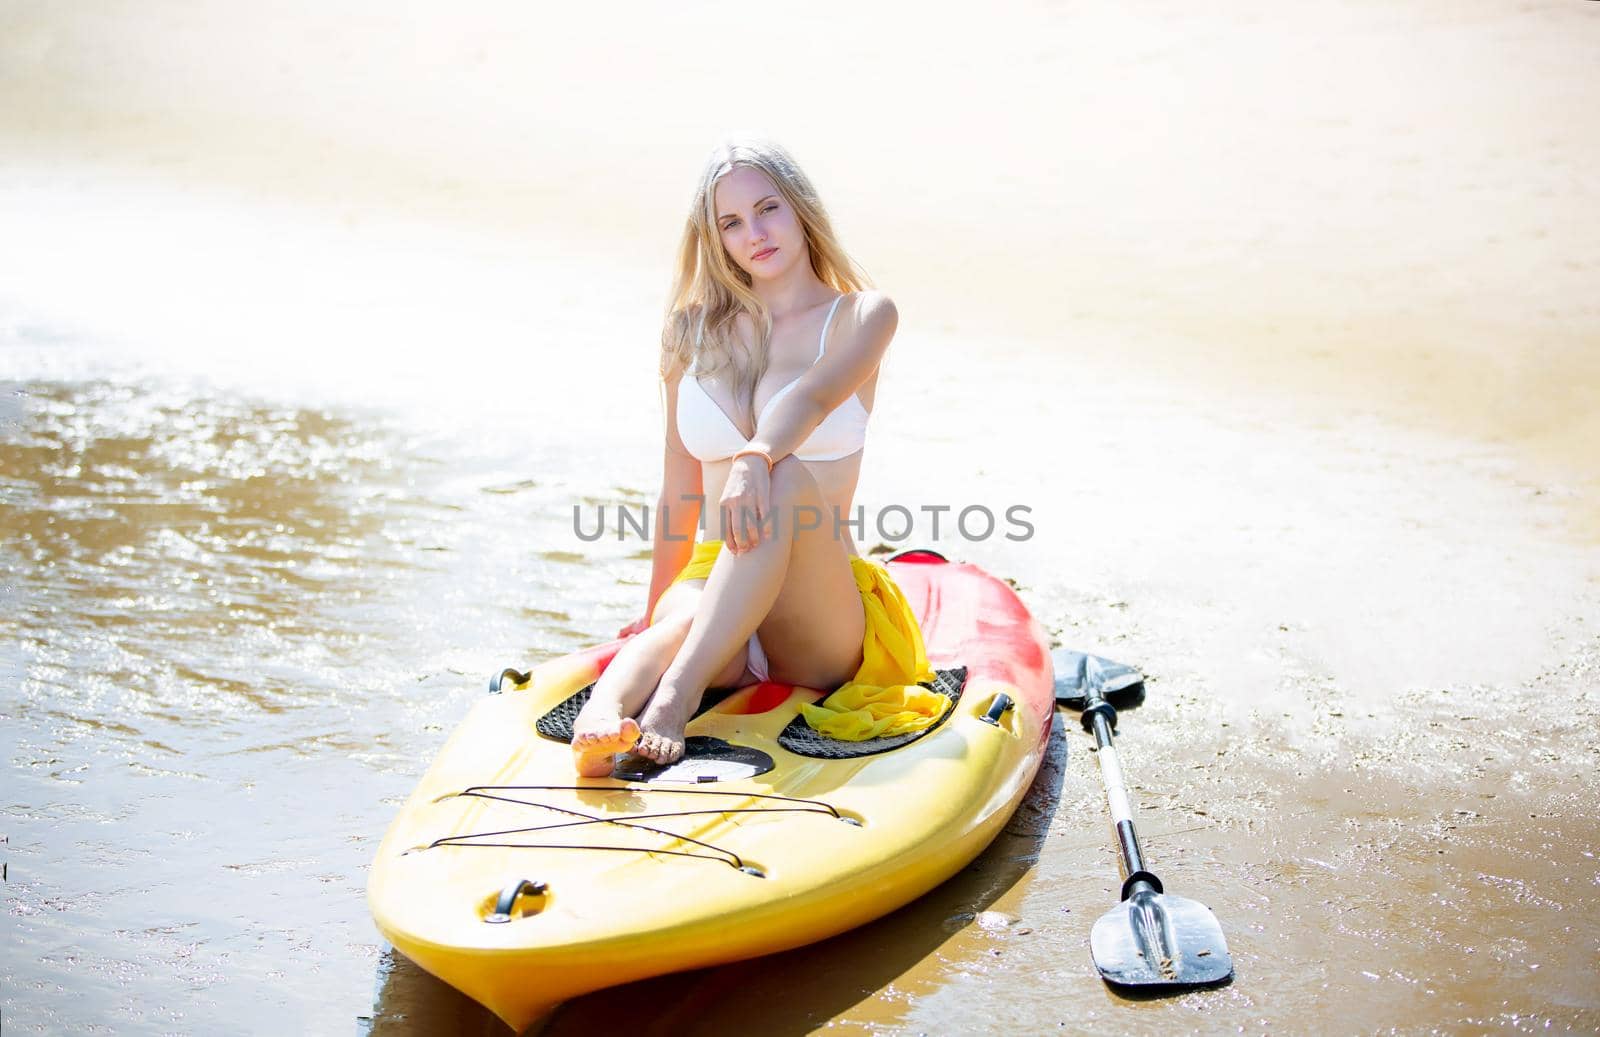 Woman on stand up paddle board. Having fun during warm summer beach vacation holiday, active woman